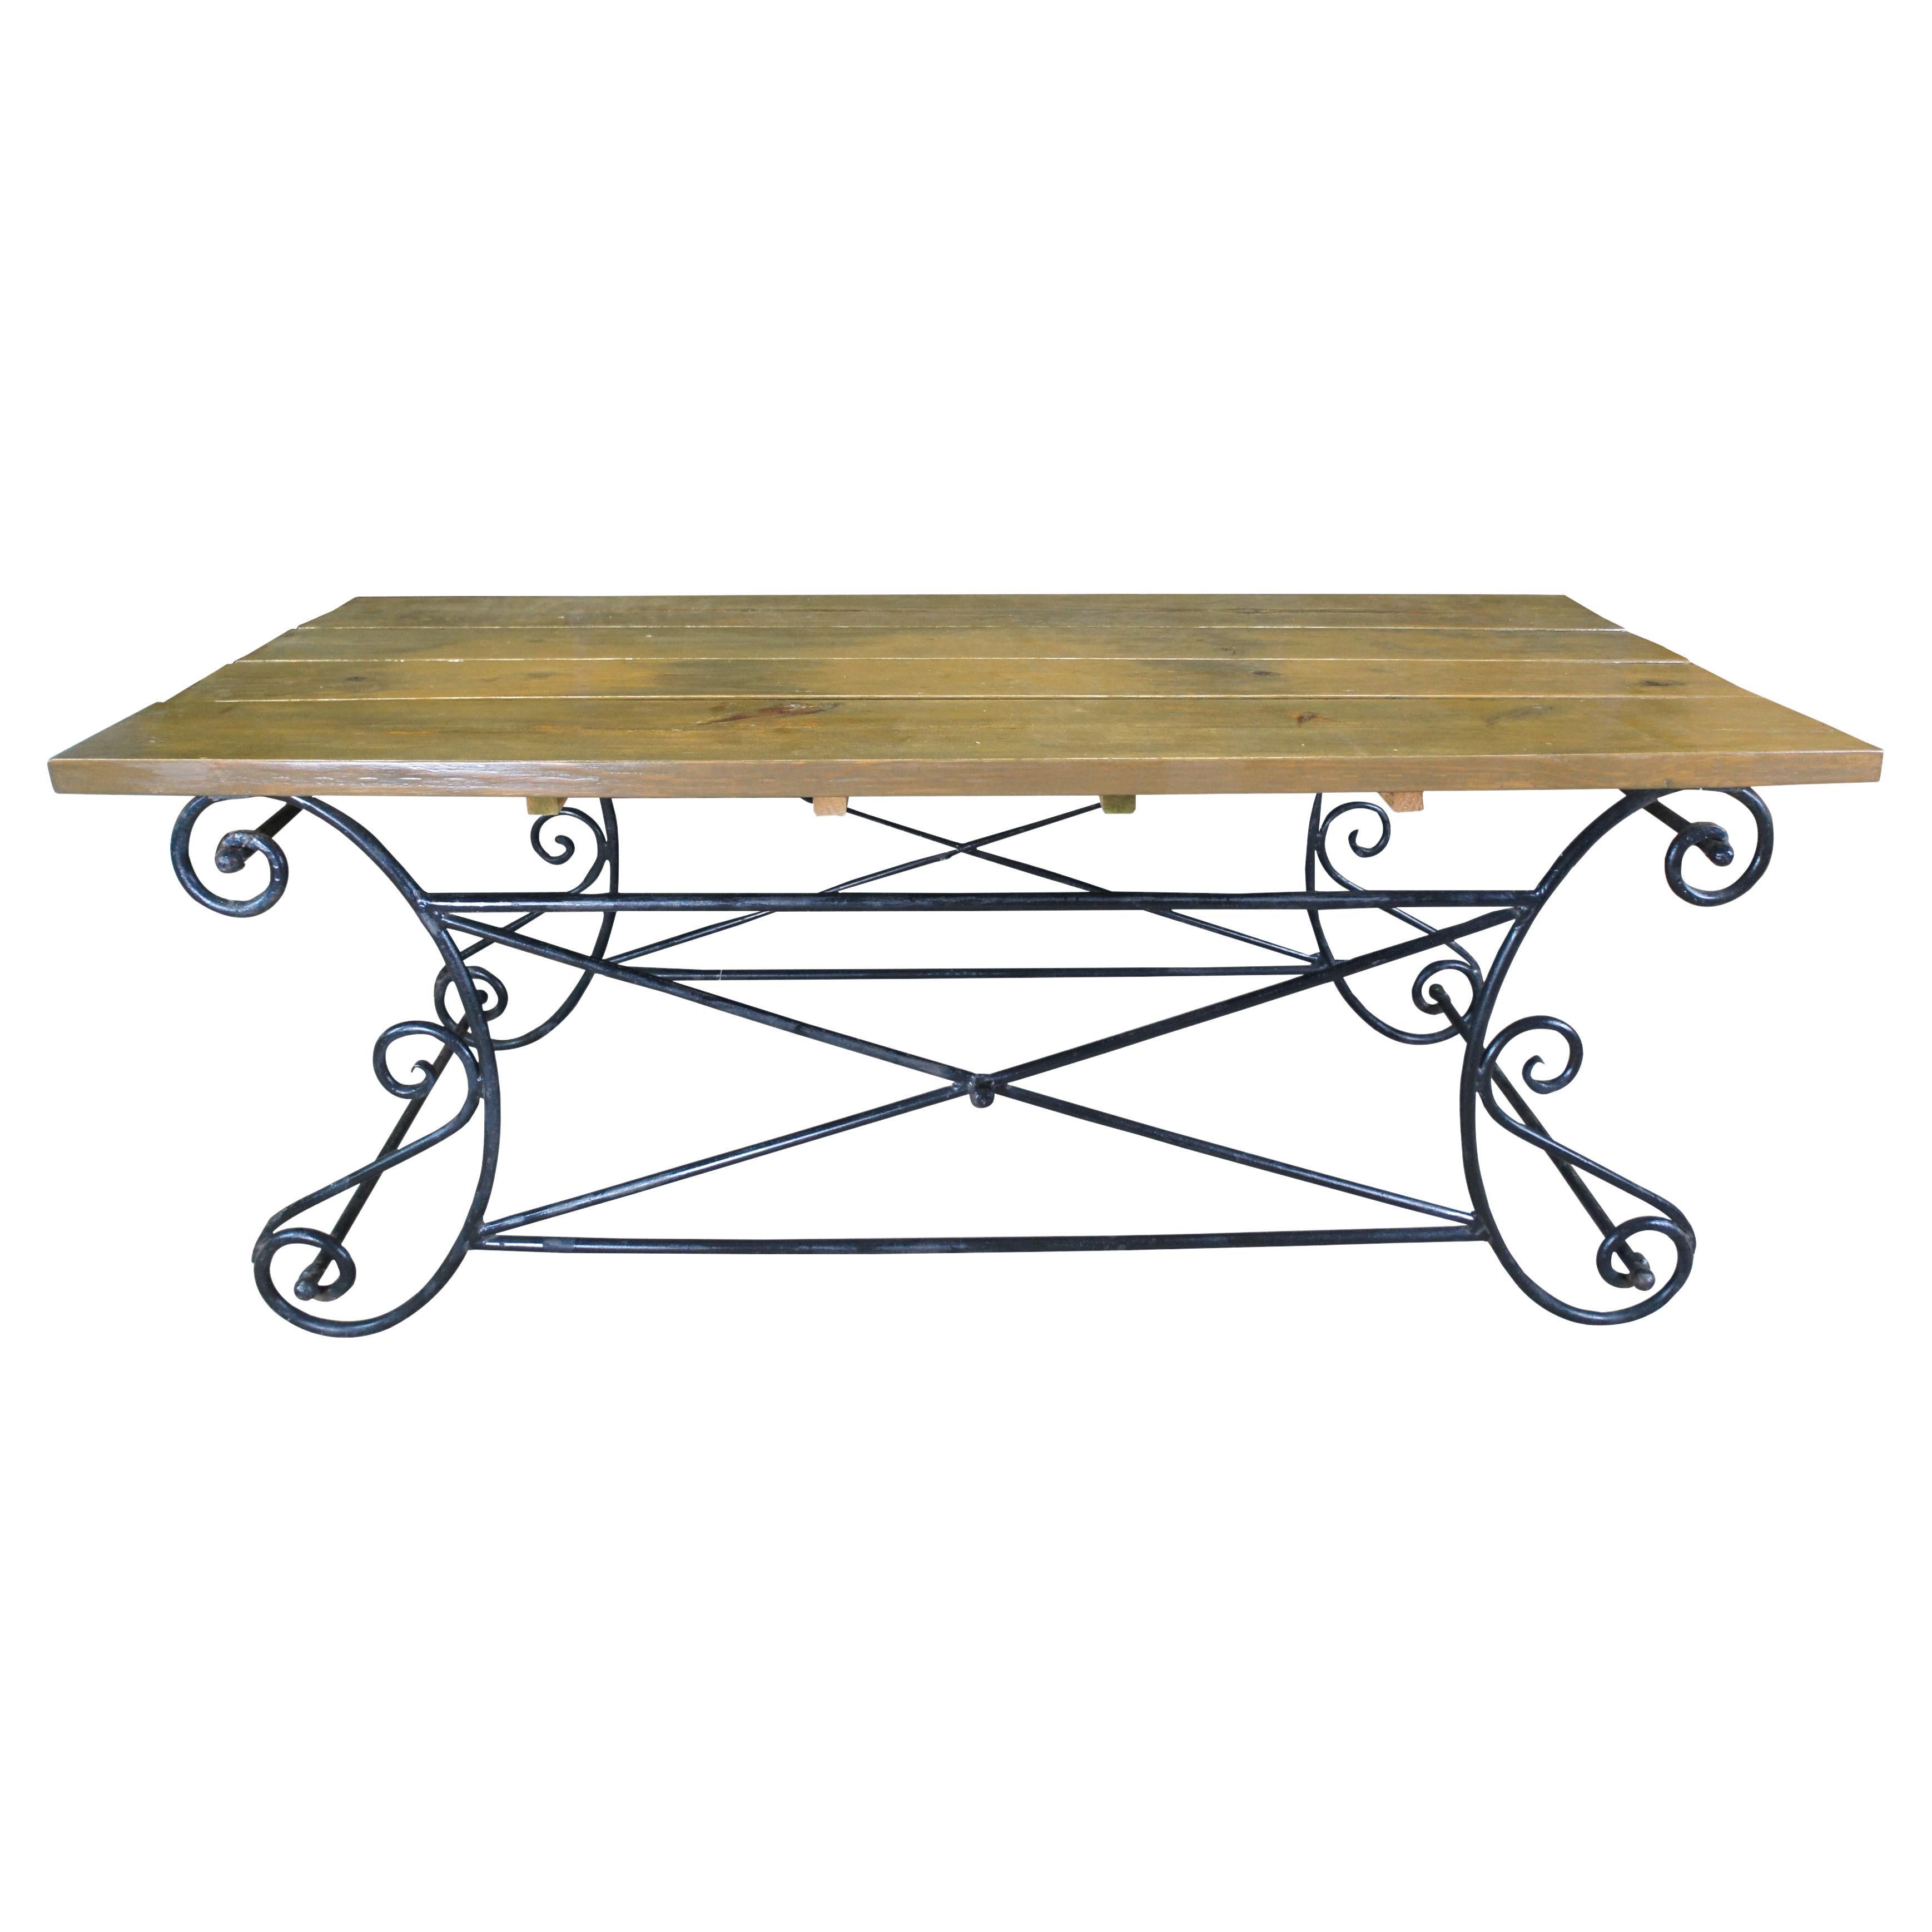 Vintage Neoclassical Directoire Scrolled Iron Outdoor Plank Top Dining Table 72" For Sale